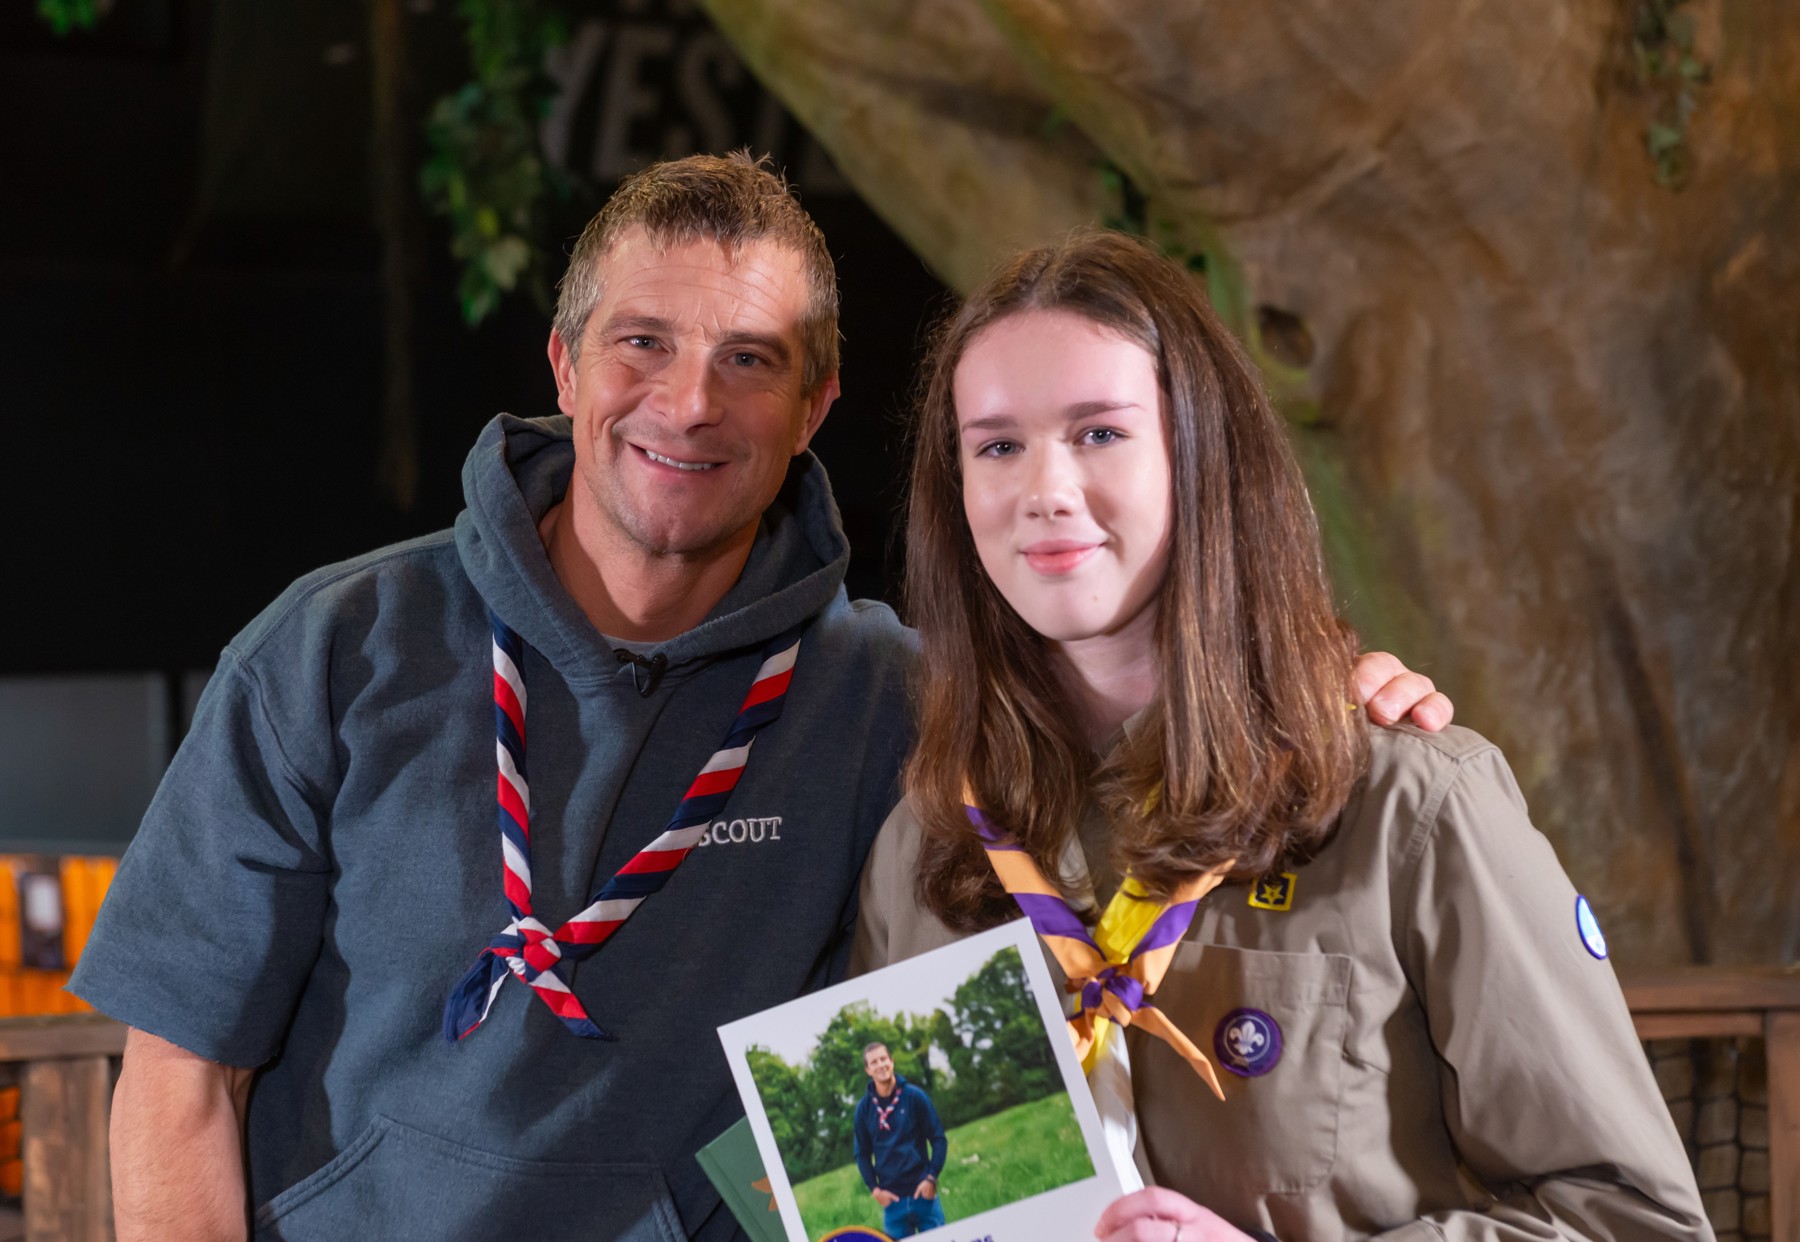 This image shows Chief Scout Bear Grylls standing next to Hannah, a teenage girl with long brown hair, who's holding up a certificate from Bear Grylls. Hannah wears a purple and orange necker, and a brown shirt with a Scout badge on. They're both smiling for the camera.